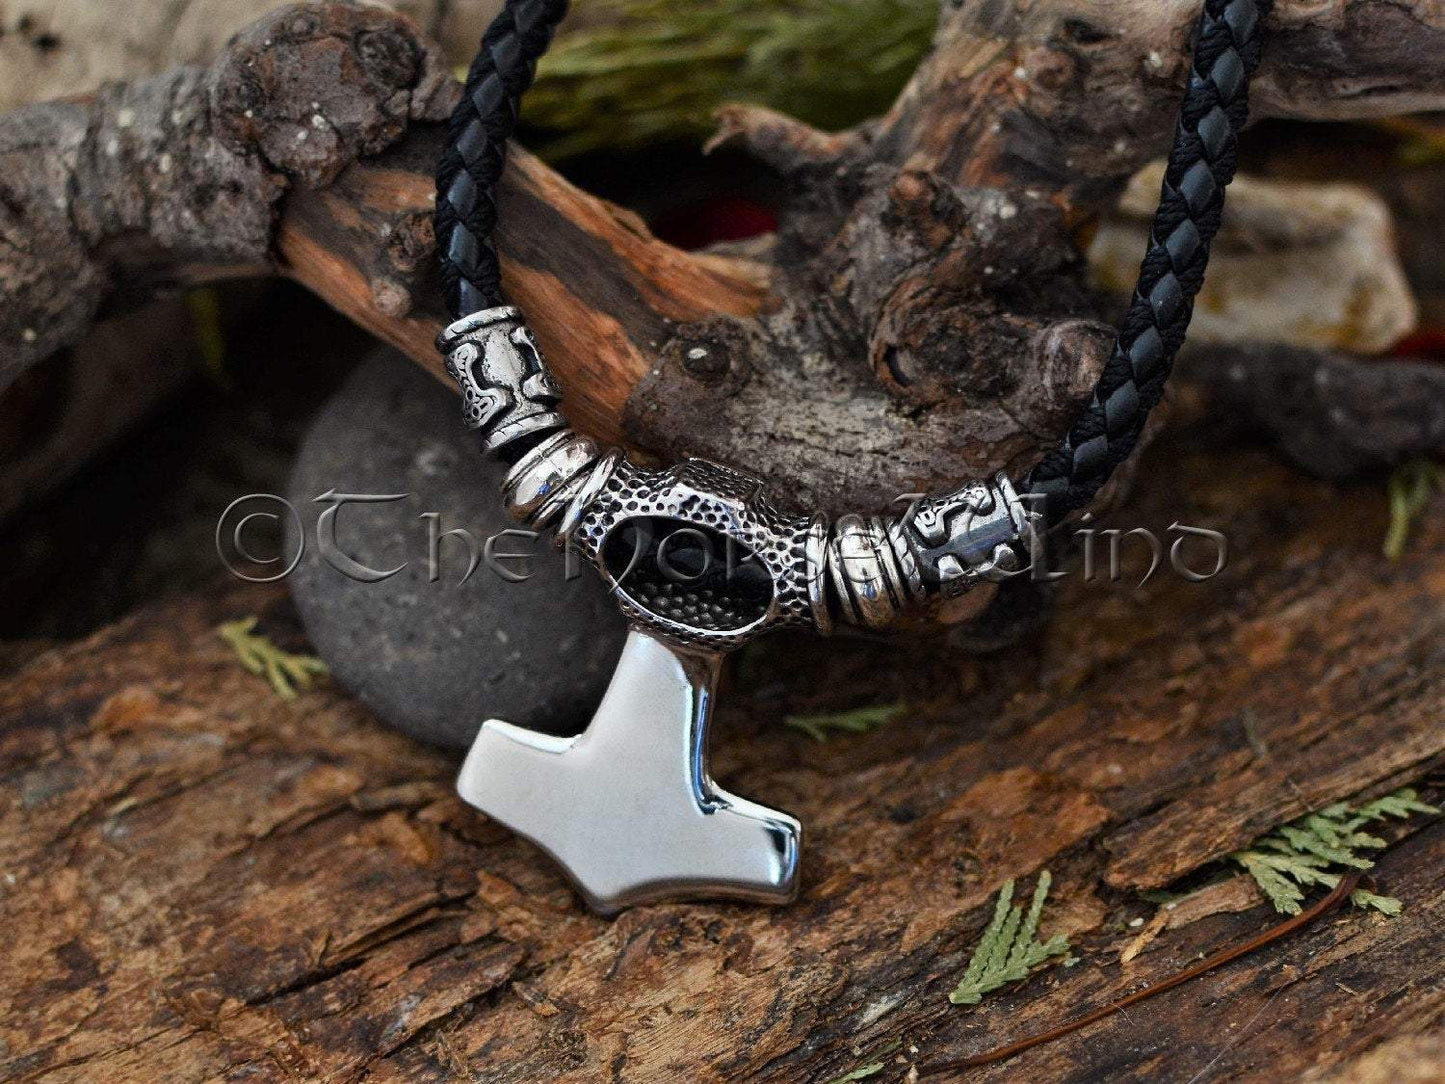 Mjolnir Pendant Thor's Hammer Viking Necklace with Celtic Cross, Stainless Steel Viking Jewelry, Strength Amulet Norse Mythology Asatru TheNorseWind